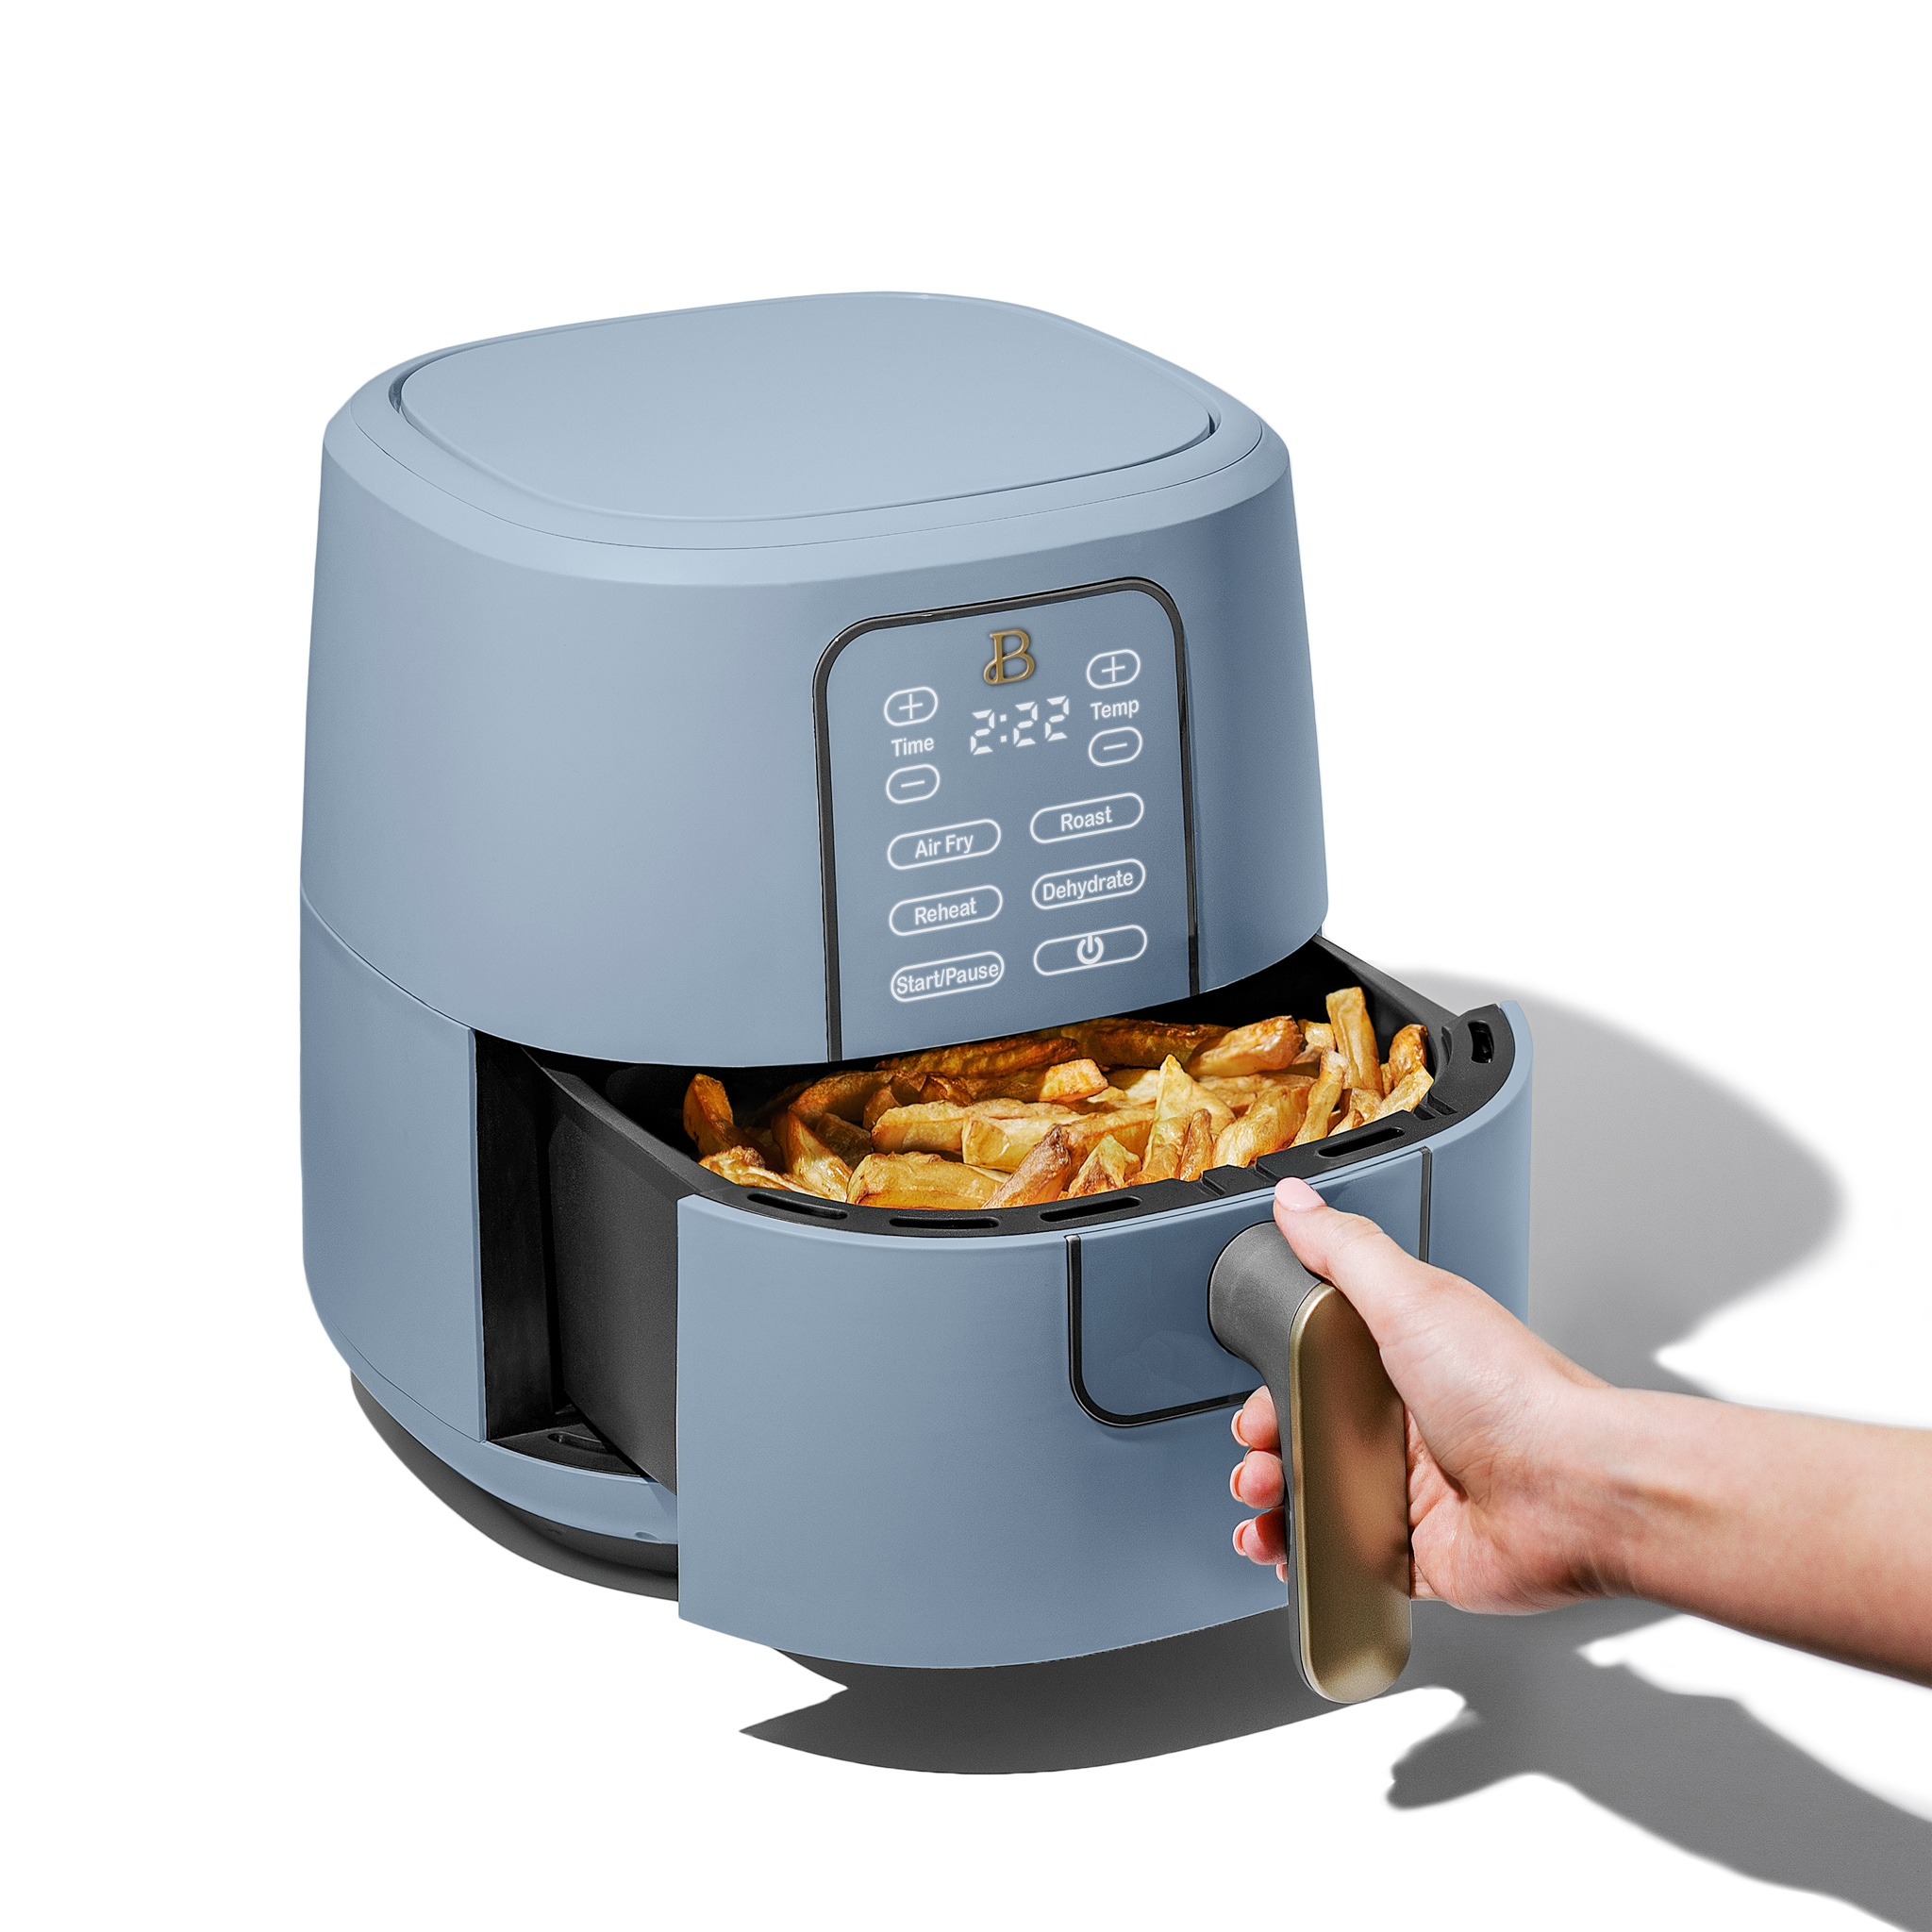 Beautiful 6 Qt Air Fryer with TurboCrisp Technology and Touch-Activated Display, Cornflower Blue by Drew Barrymore - image 7 of 9